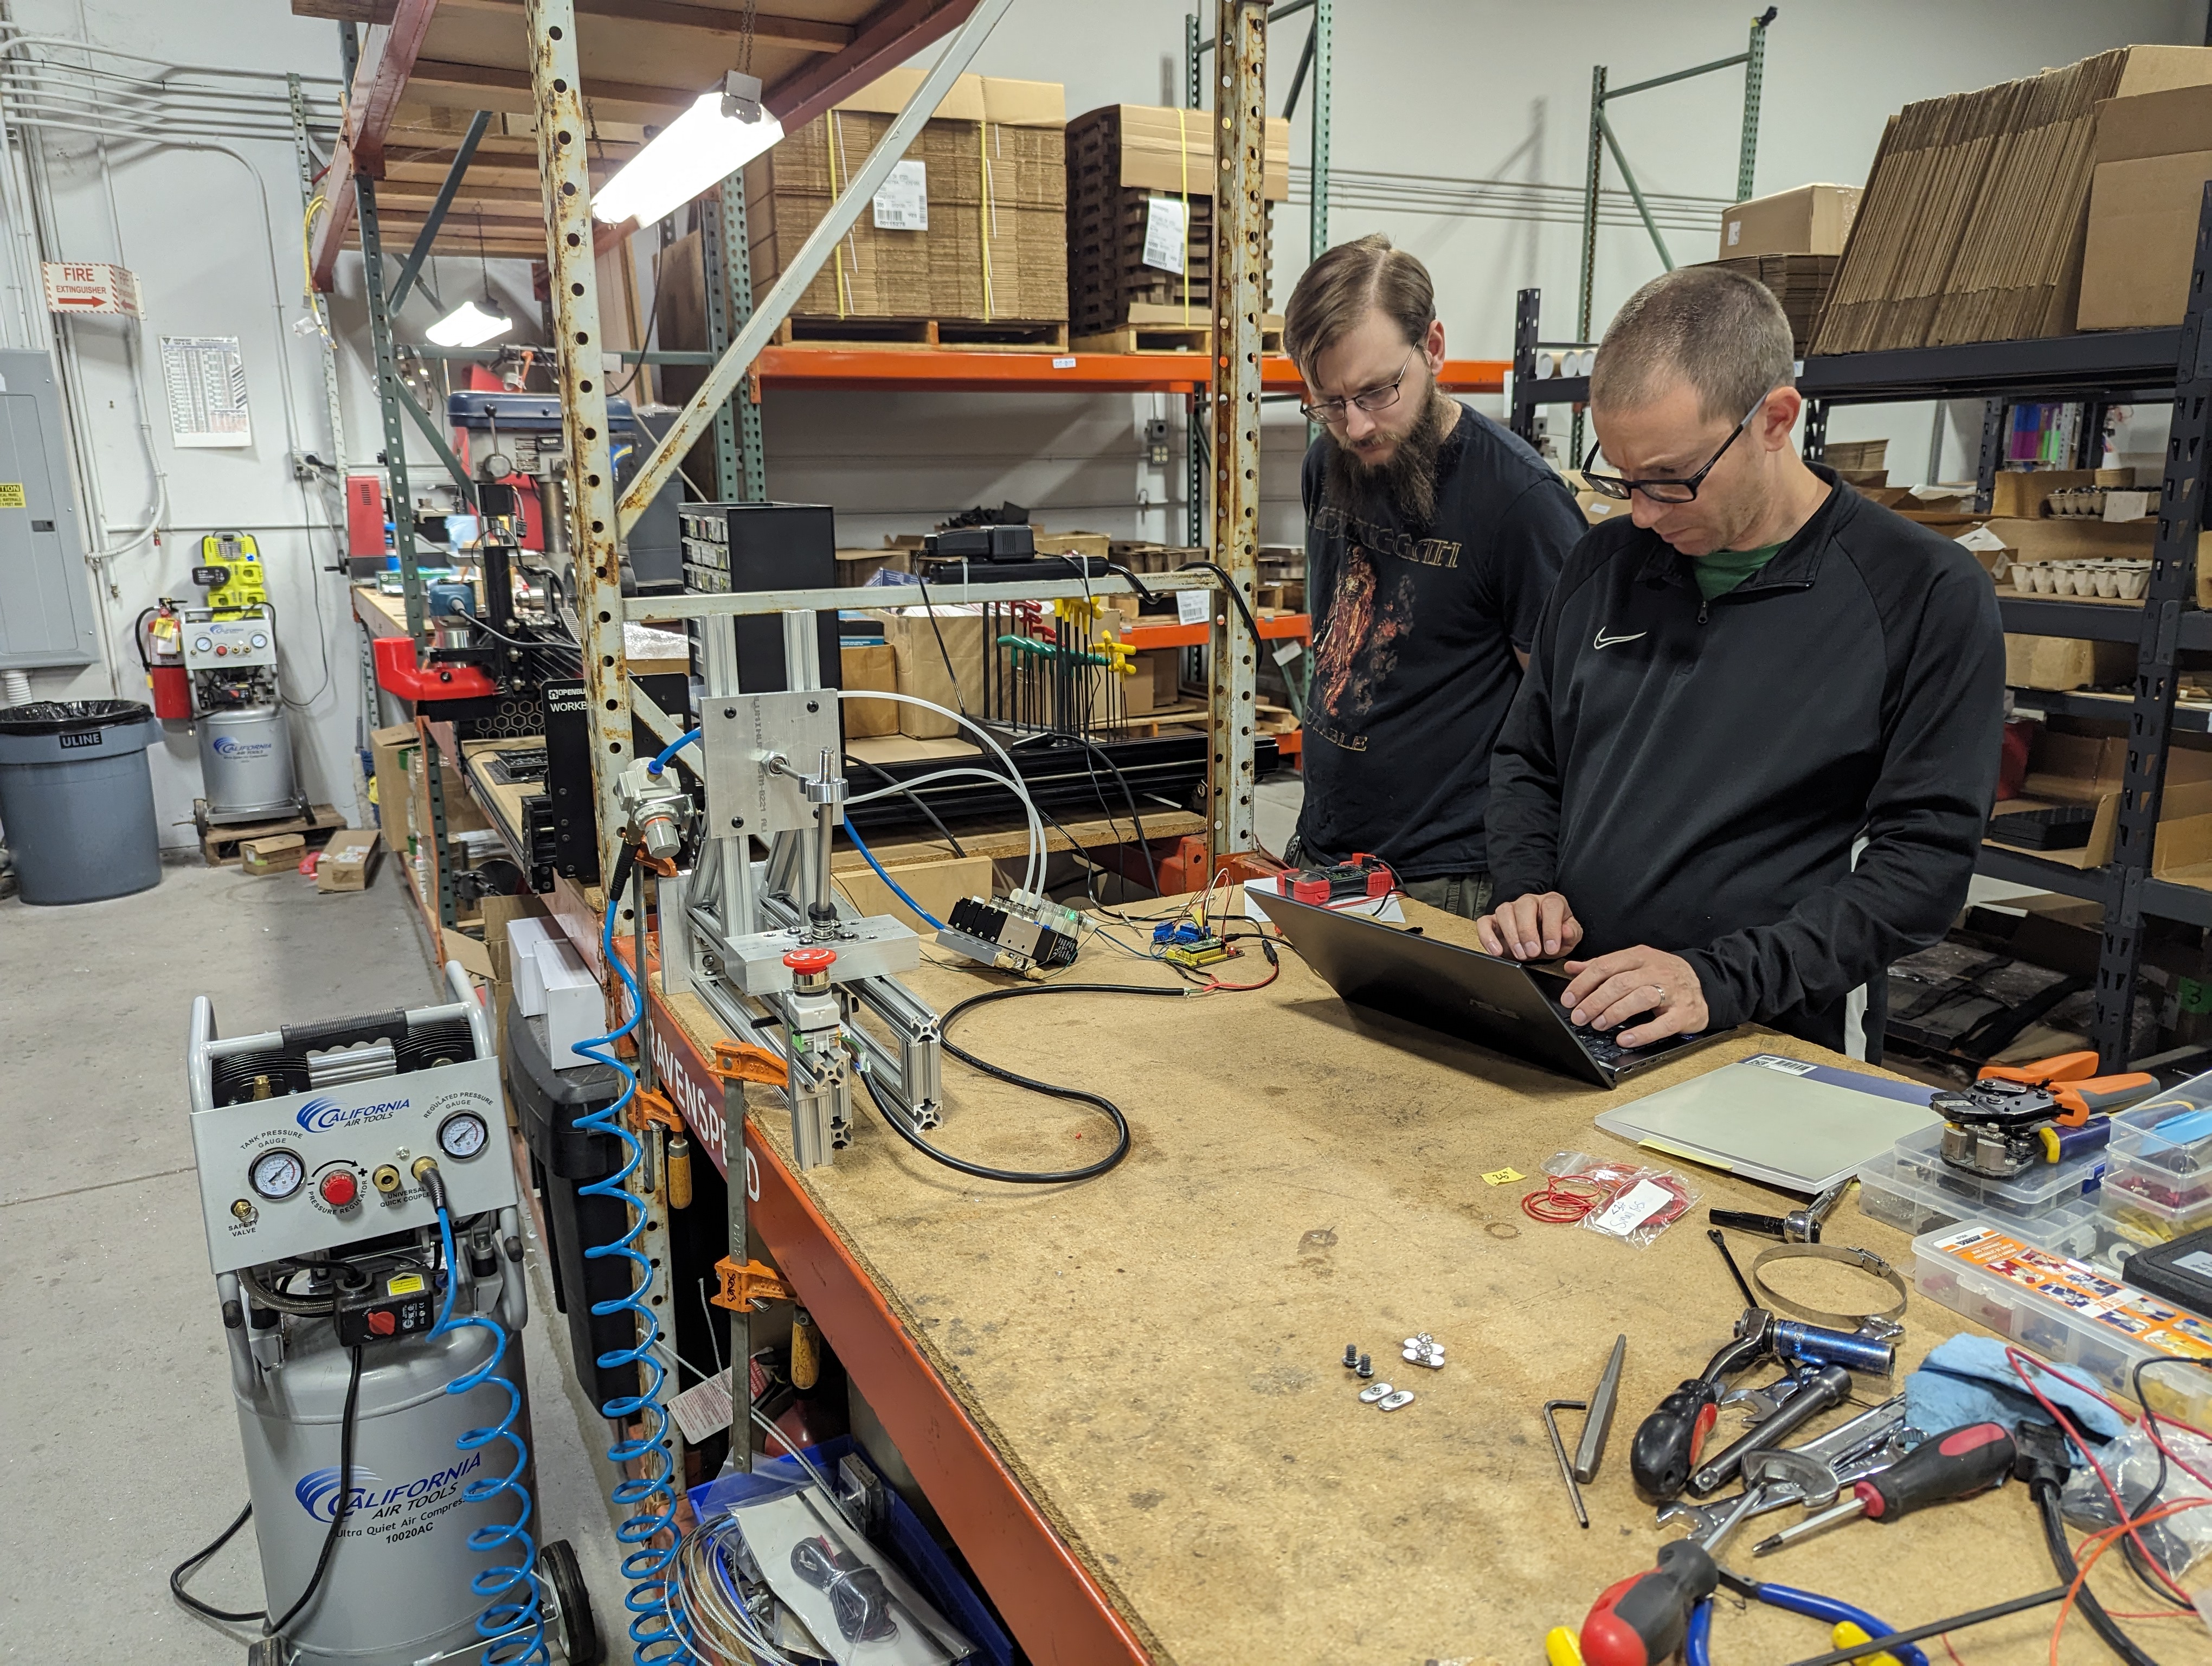 Tristan and Jacob at the workbench troubleshooting the PiPico